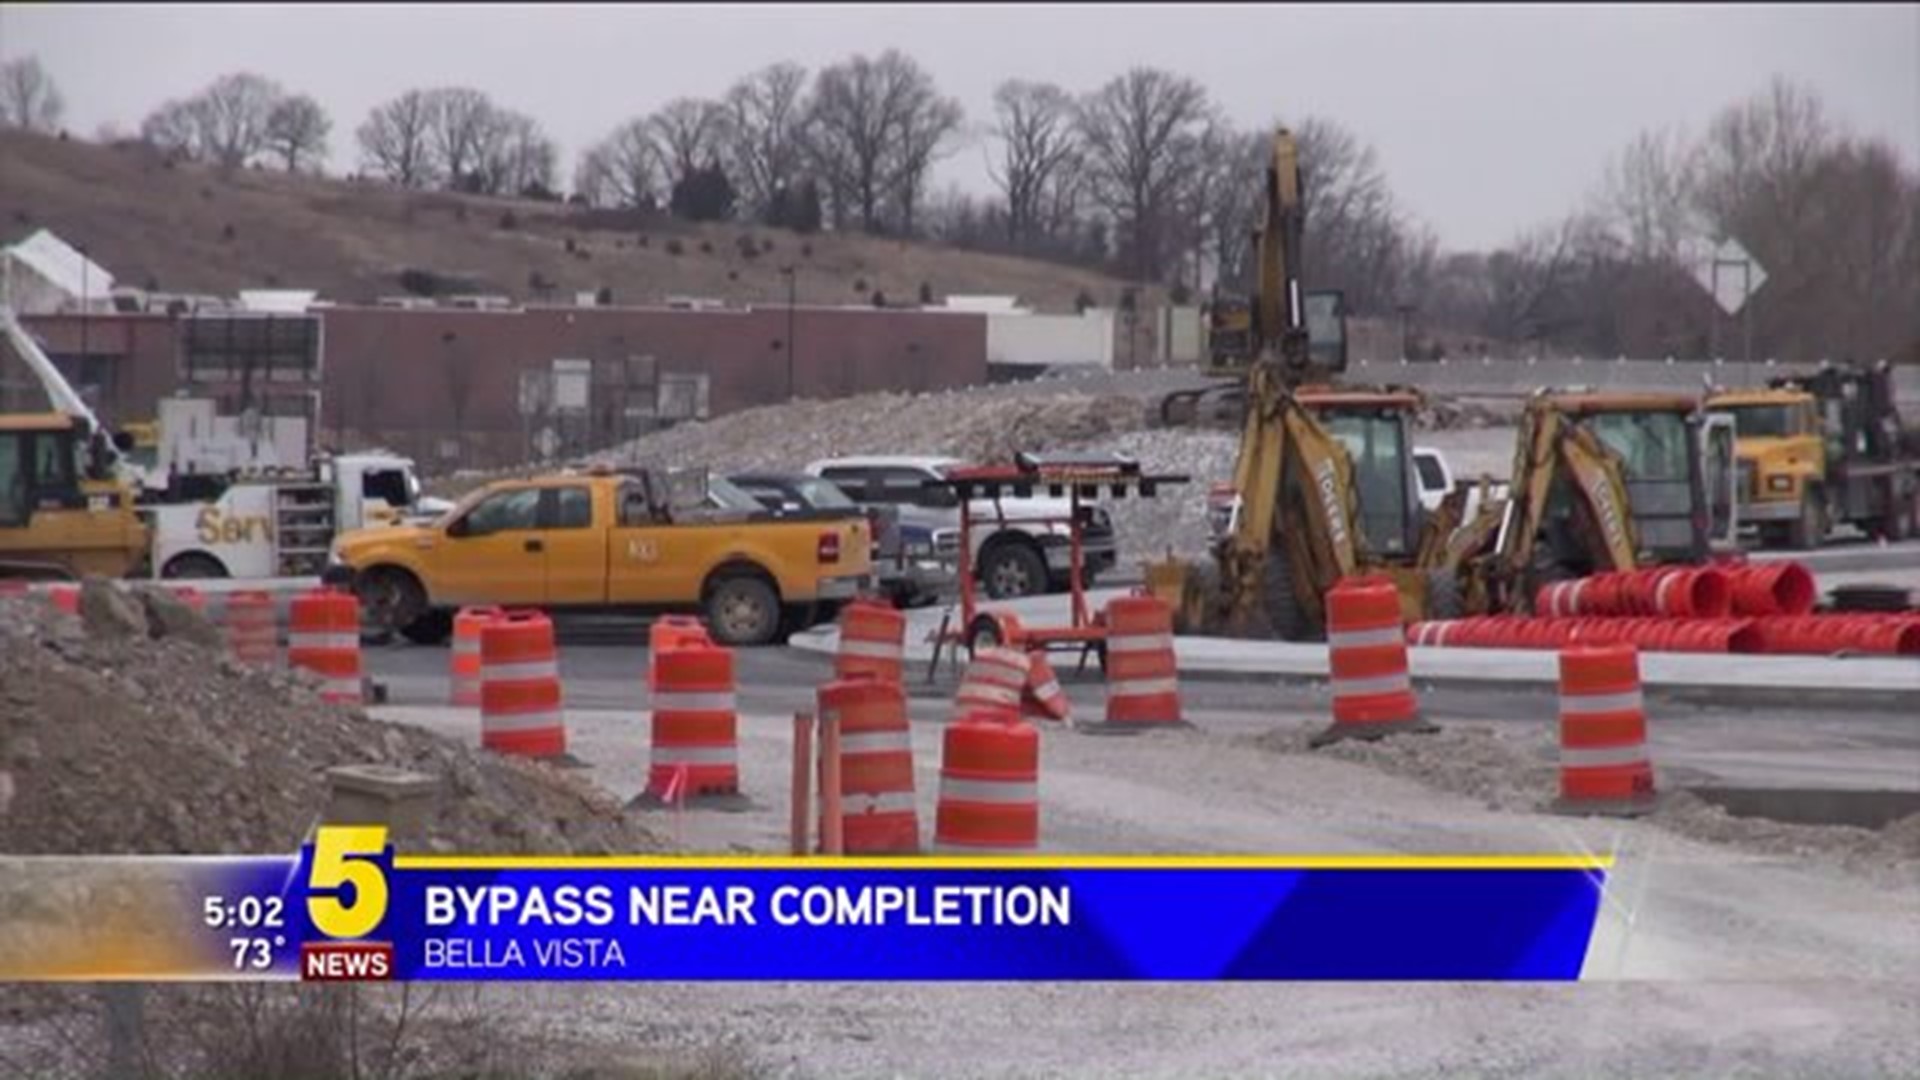 BELLA VISTA BYPASS ALMOST FINISHED